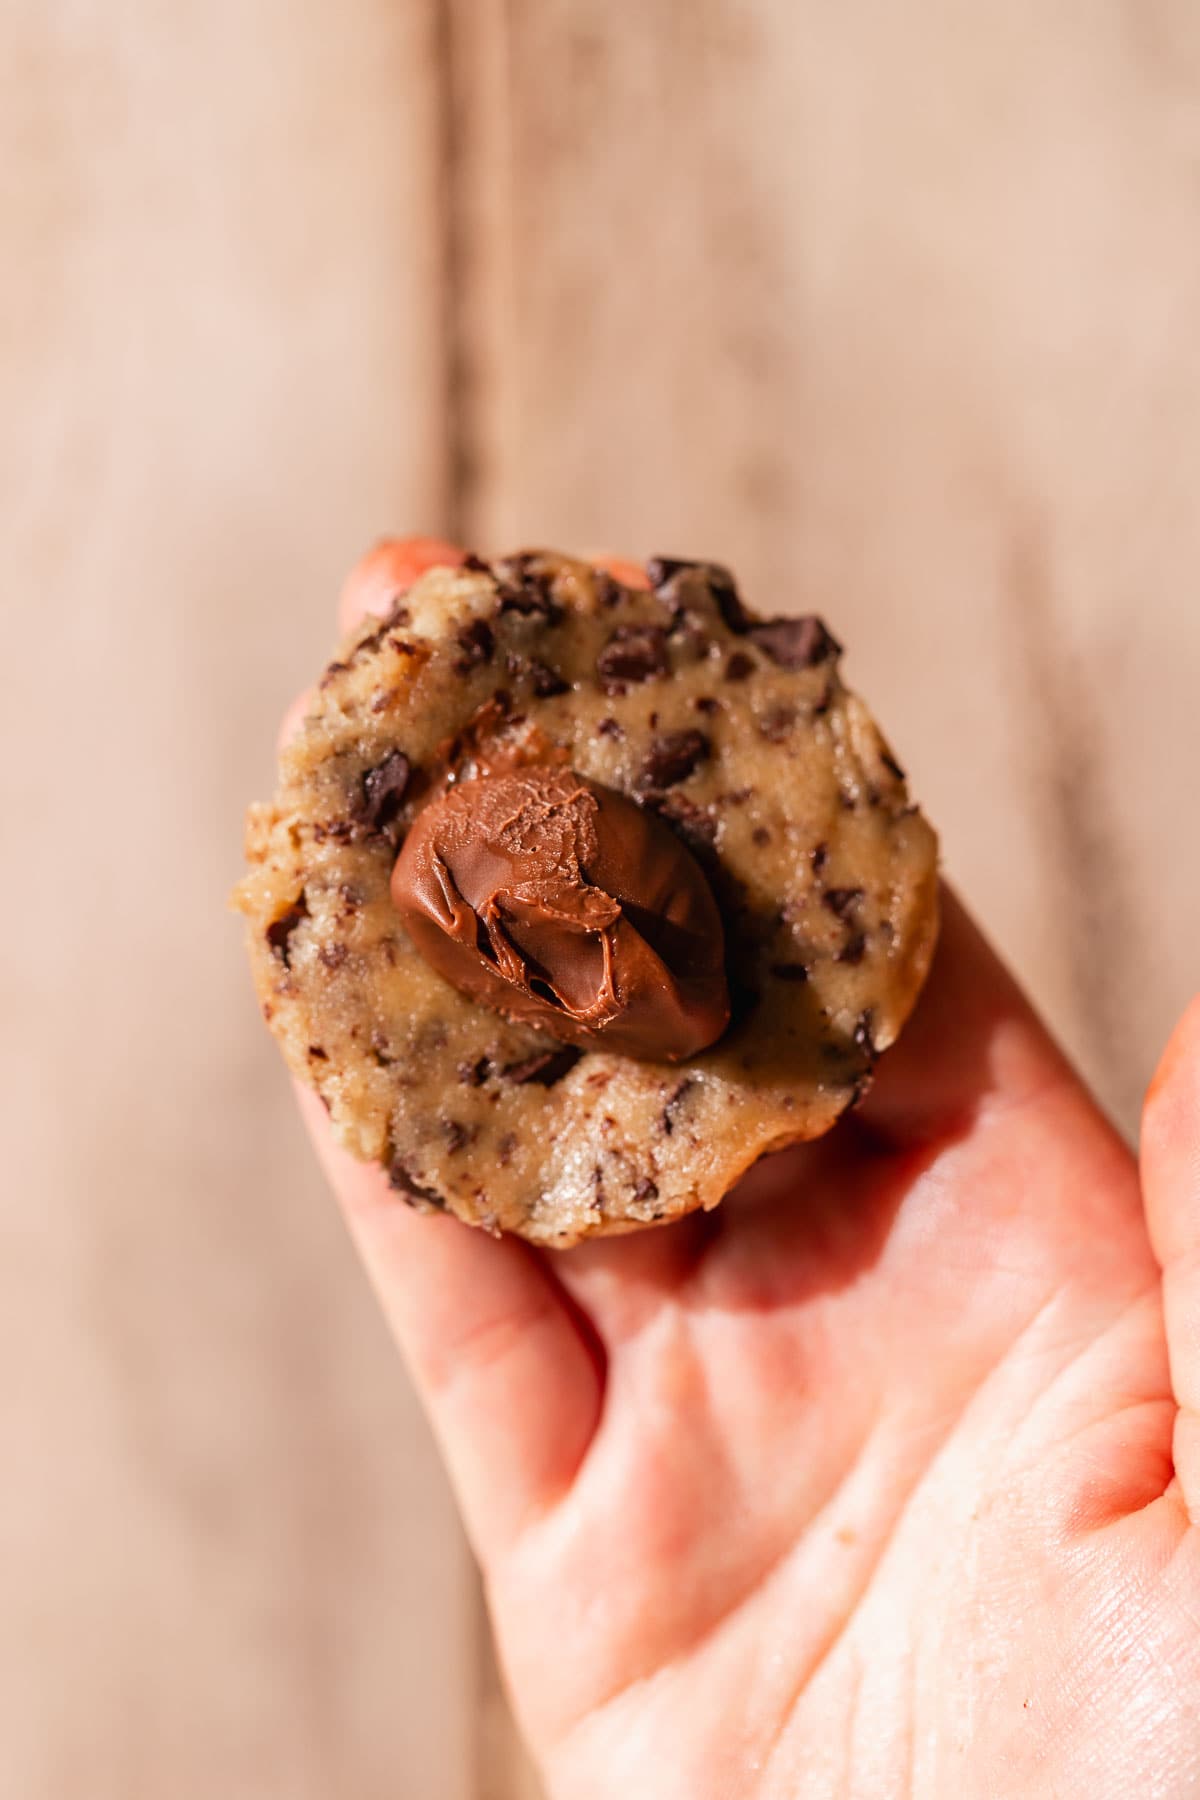 A hand holding the cookie dough that is being stuffed with chocolate.